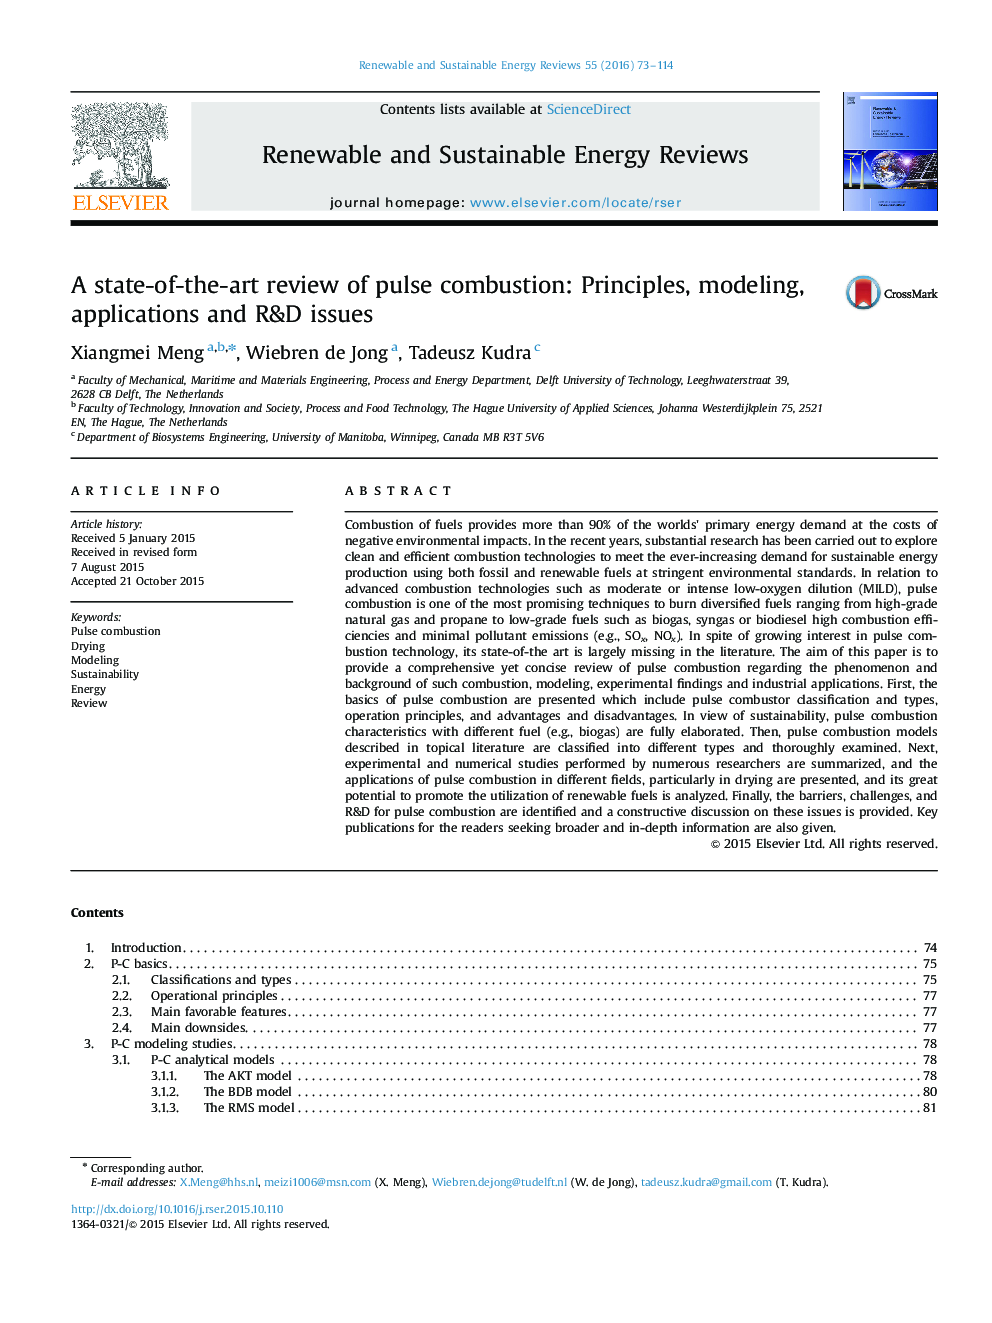 A state-of-the-art review of pulse combustion: Principles, modeling, applications and R&D issues